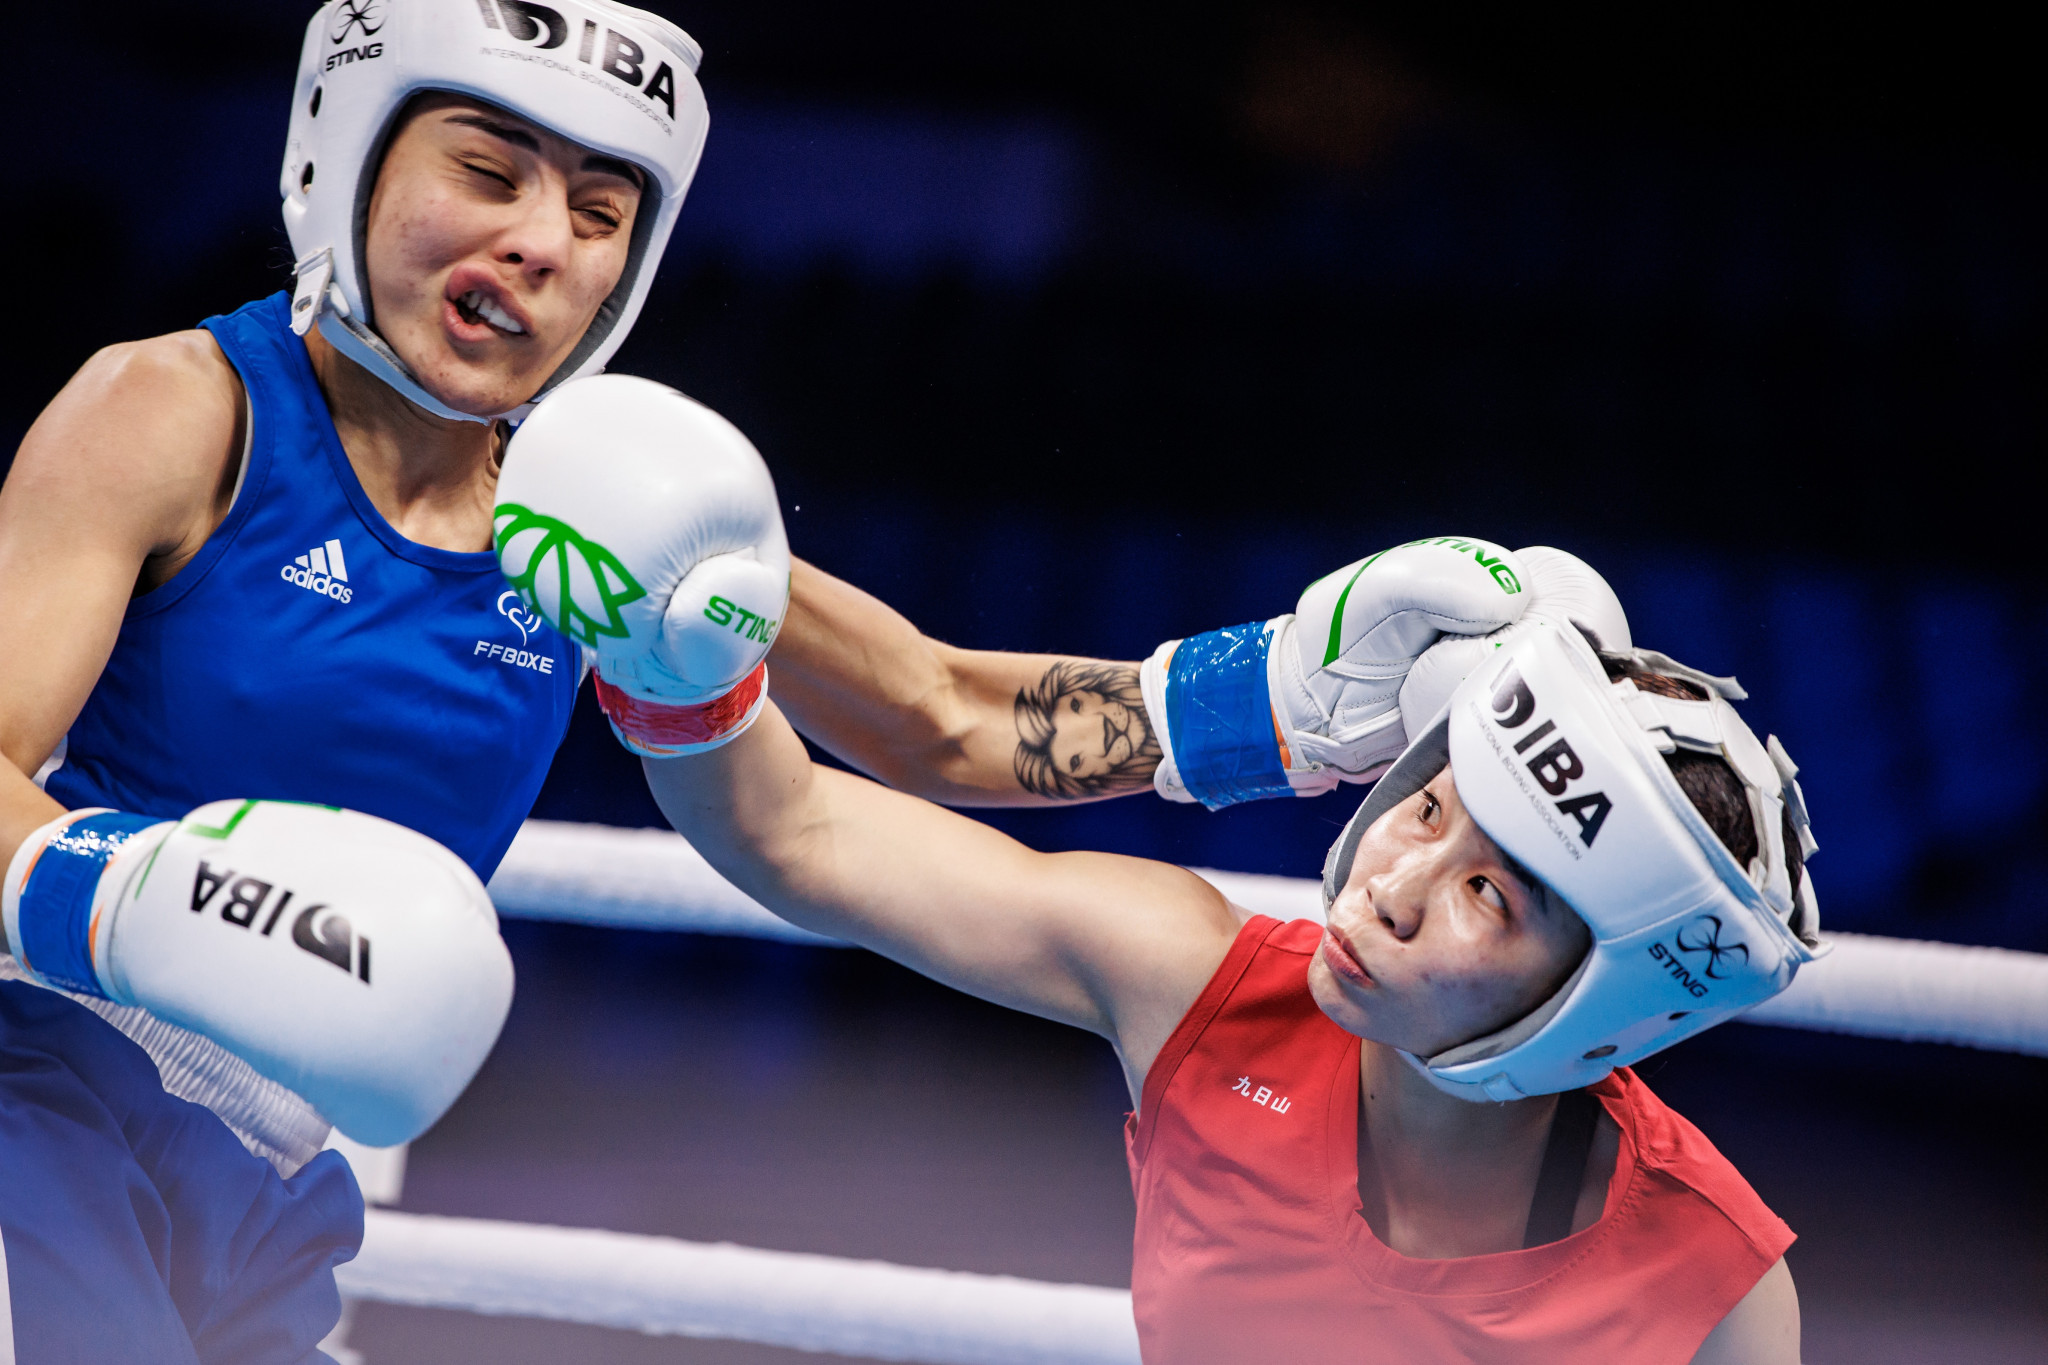 insidethegames is reporting LIVE from the IBA Women's World Boxing Championships